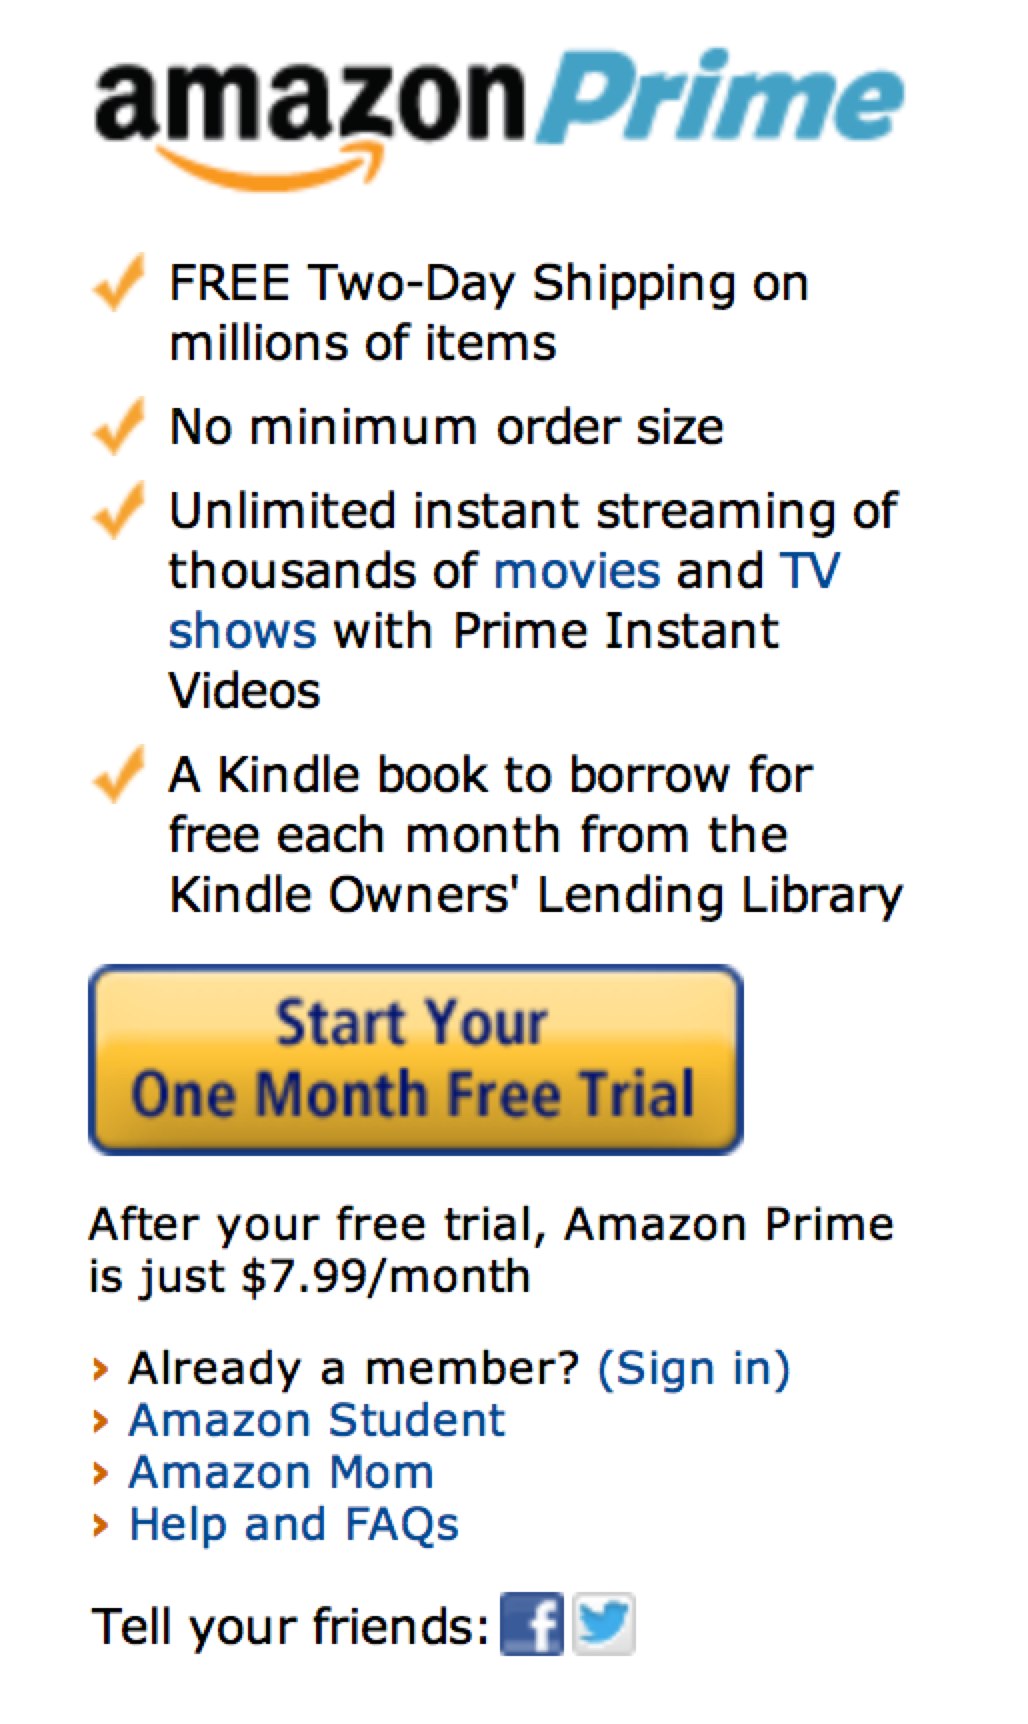 How long is the Amazon Prime free trial?